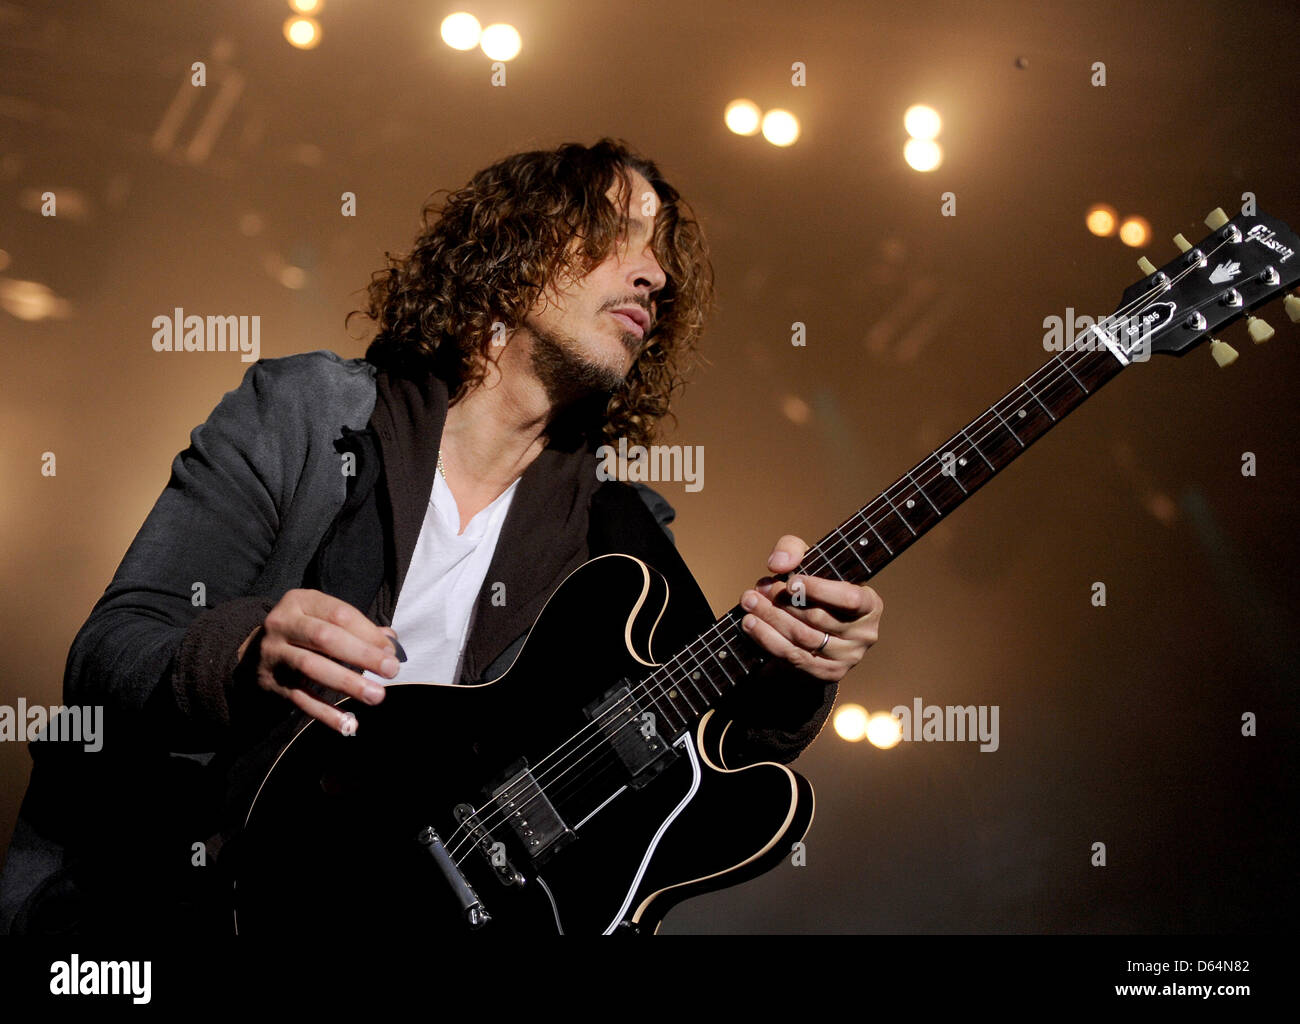 Singer Chris Cornell of the US grunge band Soundgarden performs on stage during a concert of the band at Zitadelle in Berlin, Germany, 31 May 2012. The band will also perform during the festivals Rock am Ring and Rock im Park which will take place this weekend. Photo: BRITTA PEDERSEN Stock Photo